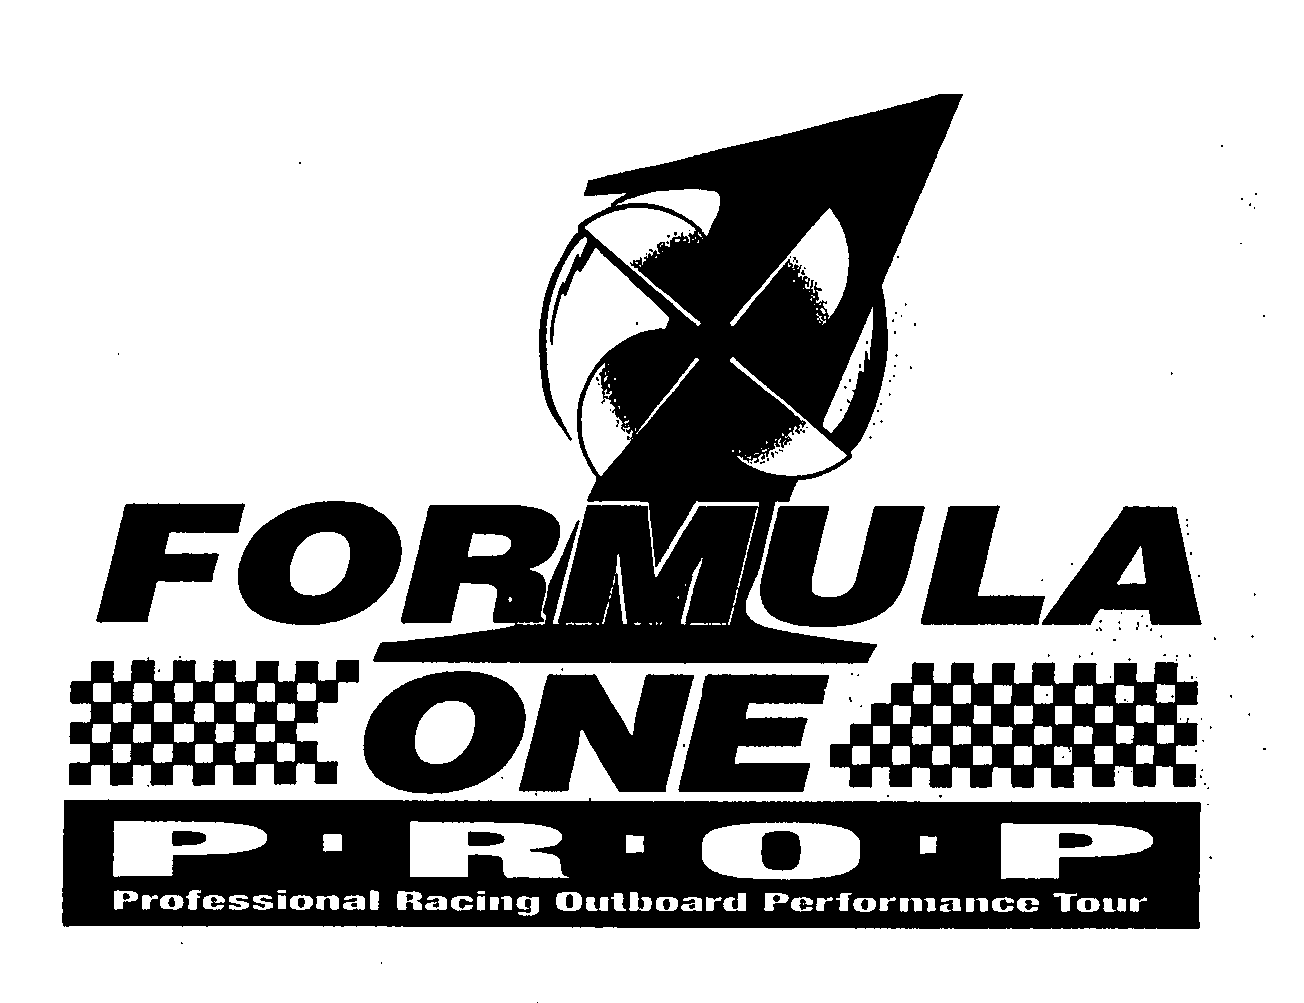  FORMULA ONE P R O P PROFESSIONAL RACING OUTBOARD PERFORMANCE TOUR